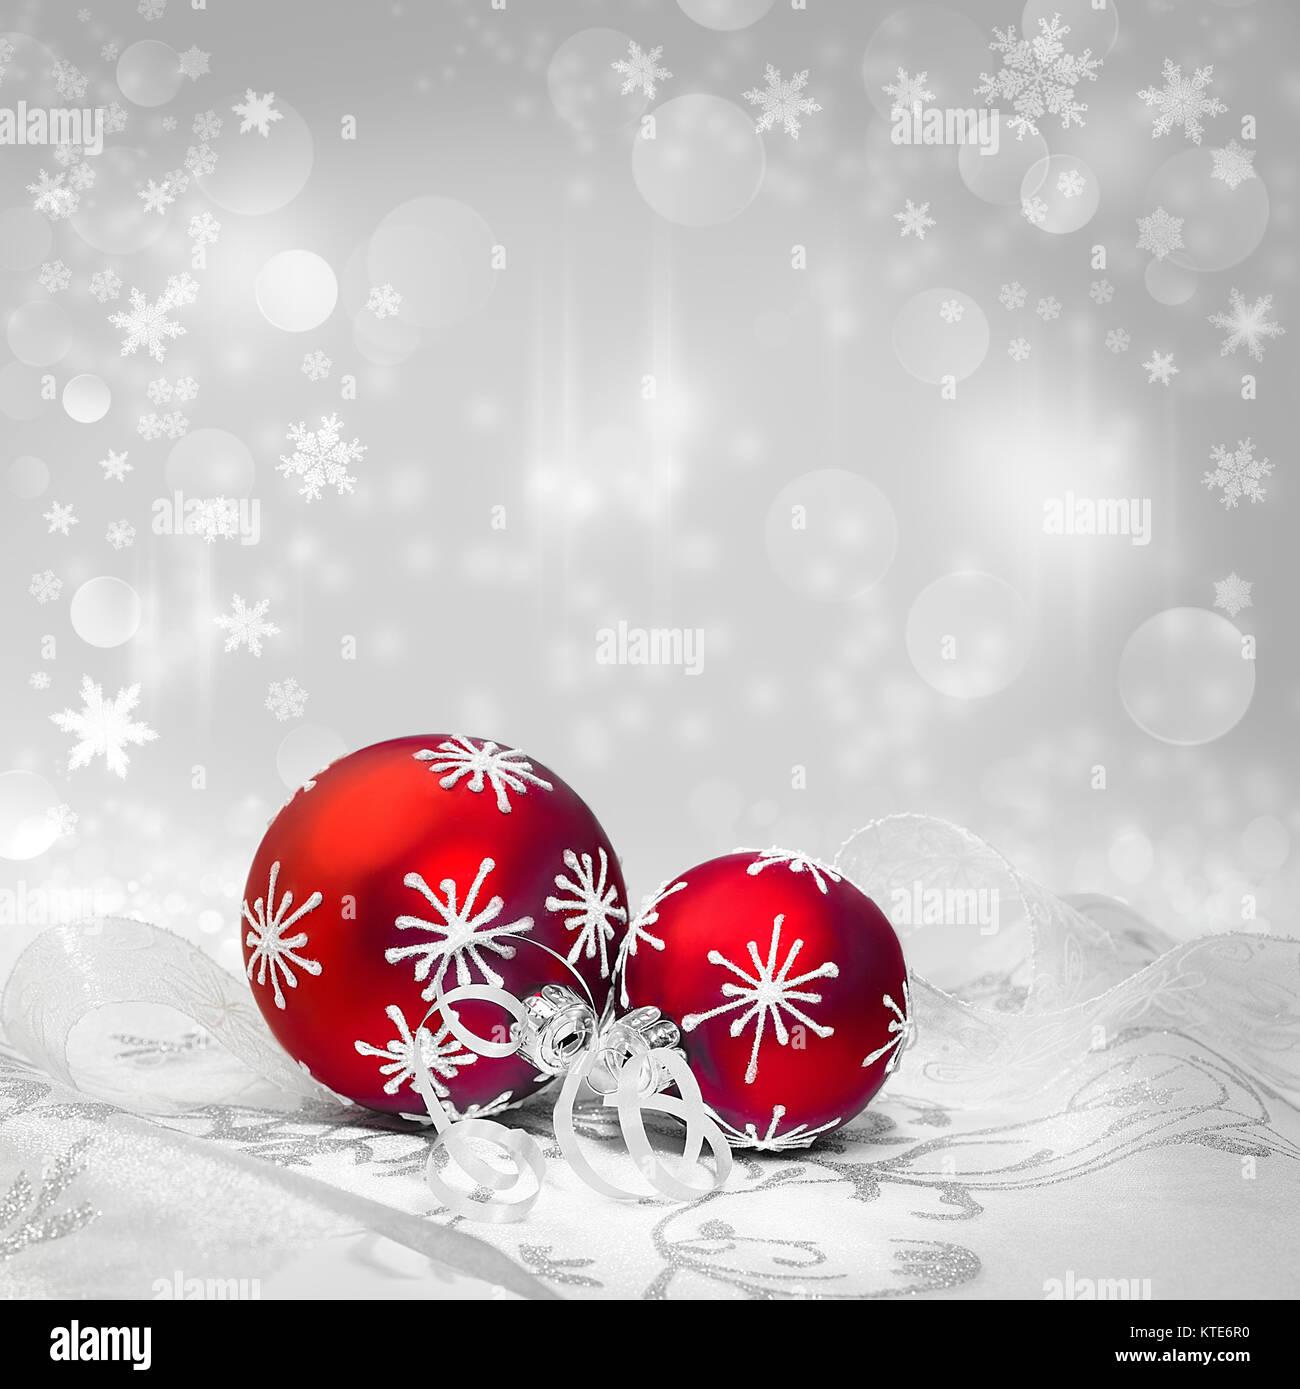 Red Christmas Decorations With Silver Ornament On Neutral Winter